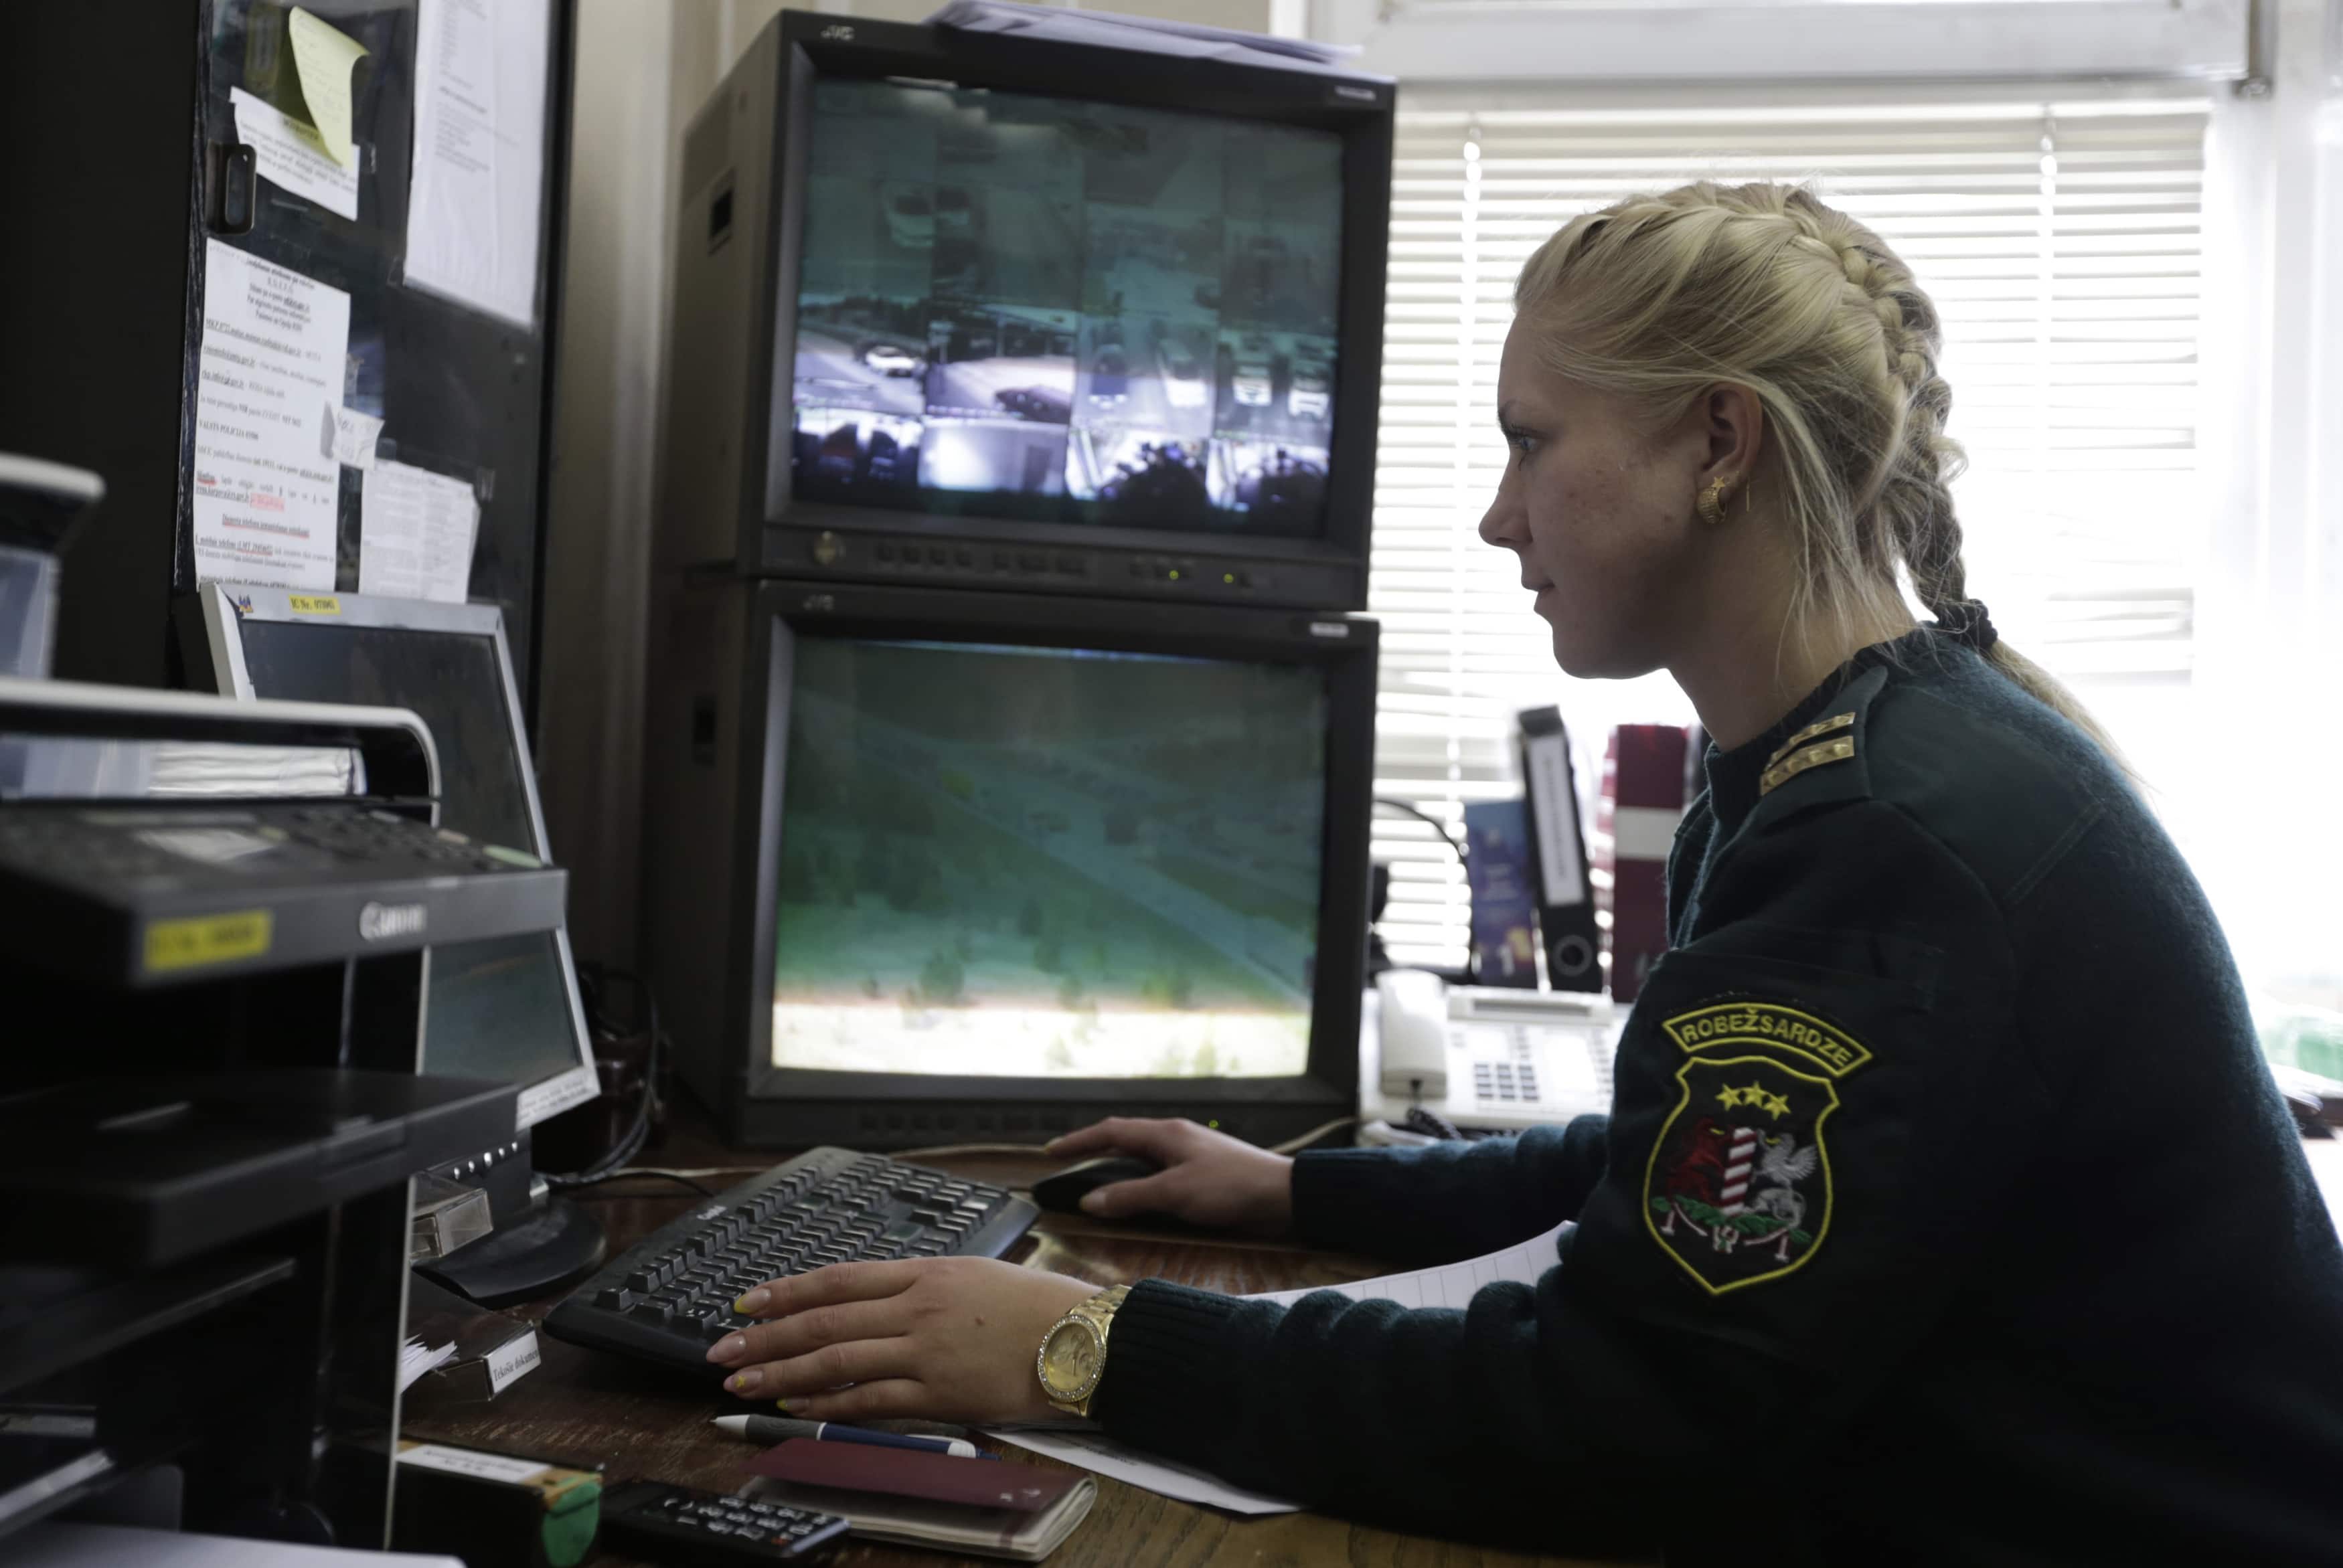 A Latvian border guard works with the surveillance system in the border crossing point in Terehova, 3 May 2014, REUTERS/Ints Kalnins